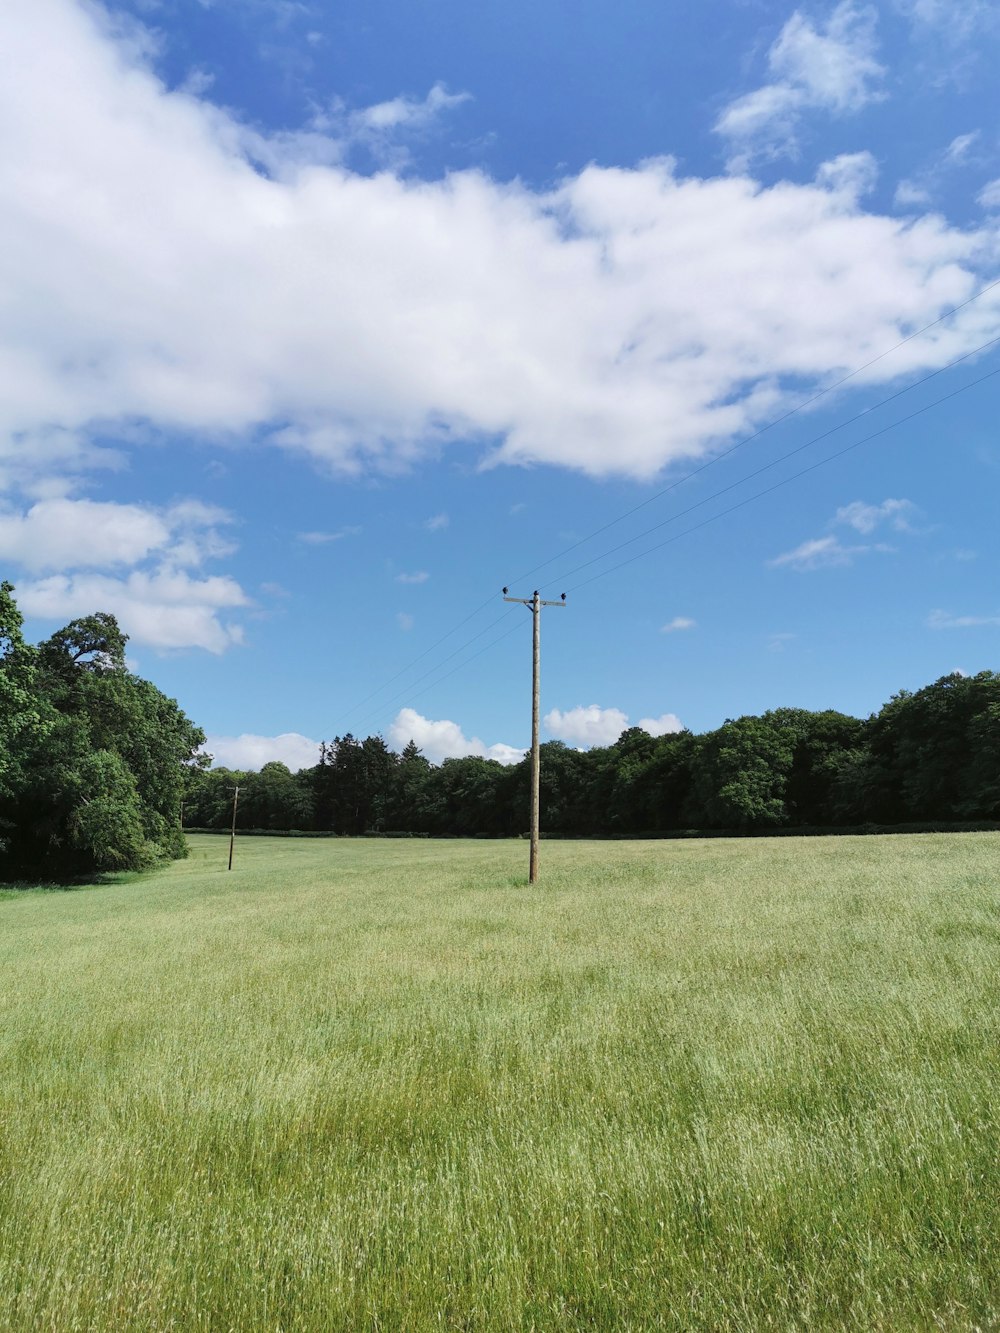 green grass field with green trees under blue sky and white clouds during daytime